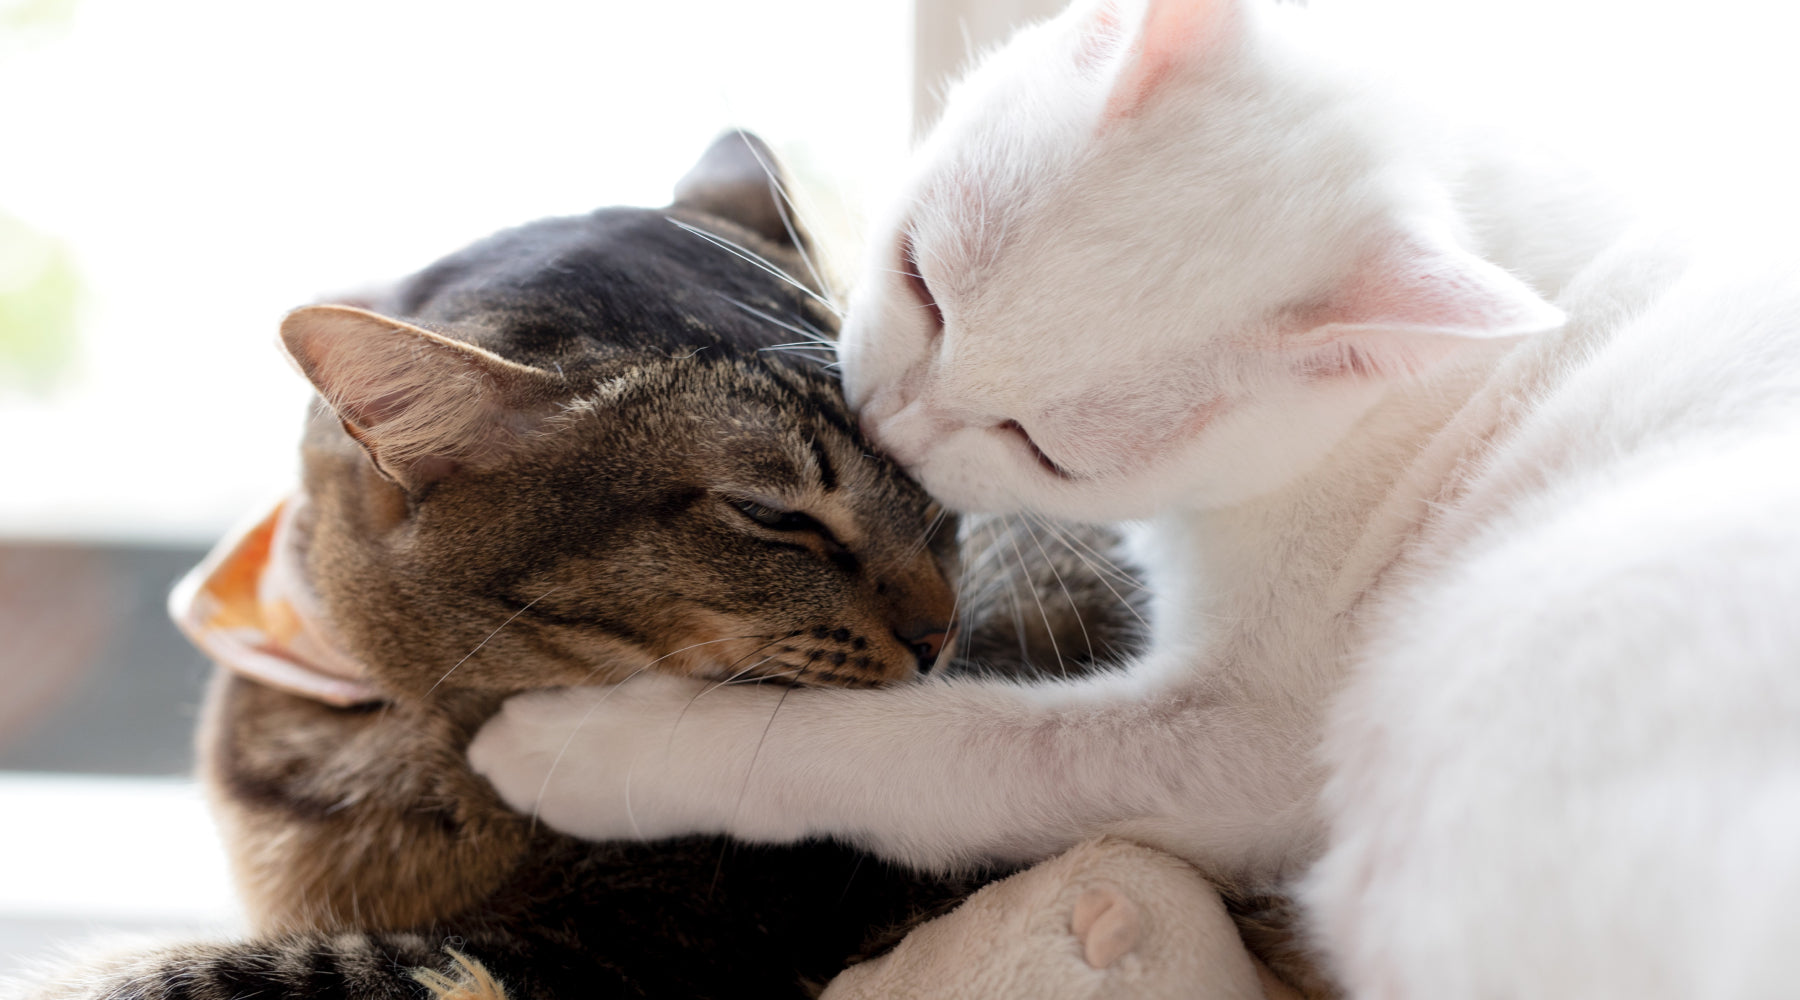 Do cat pheromone diffusers actually work?